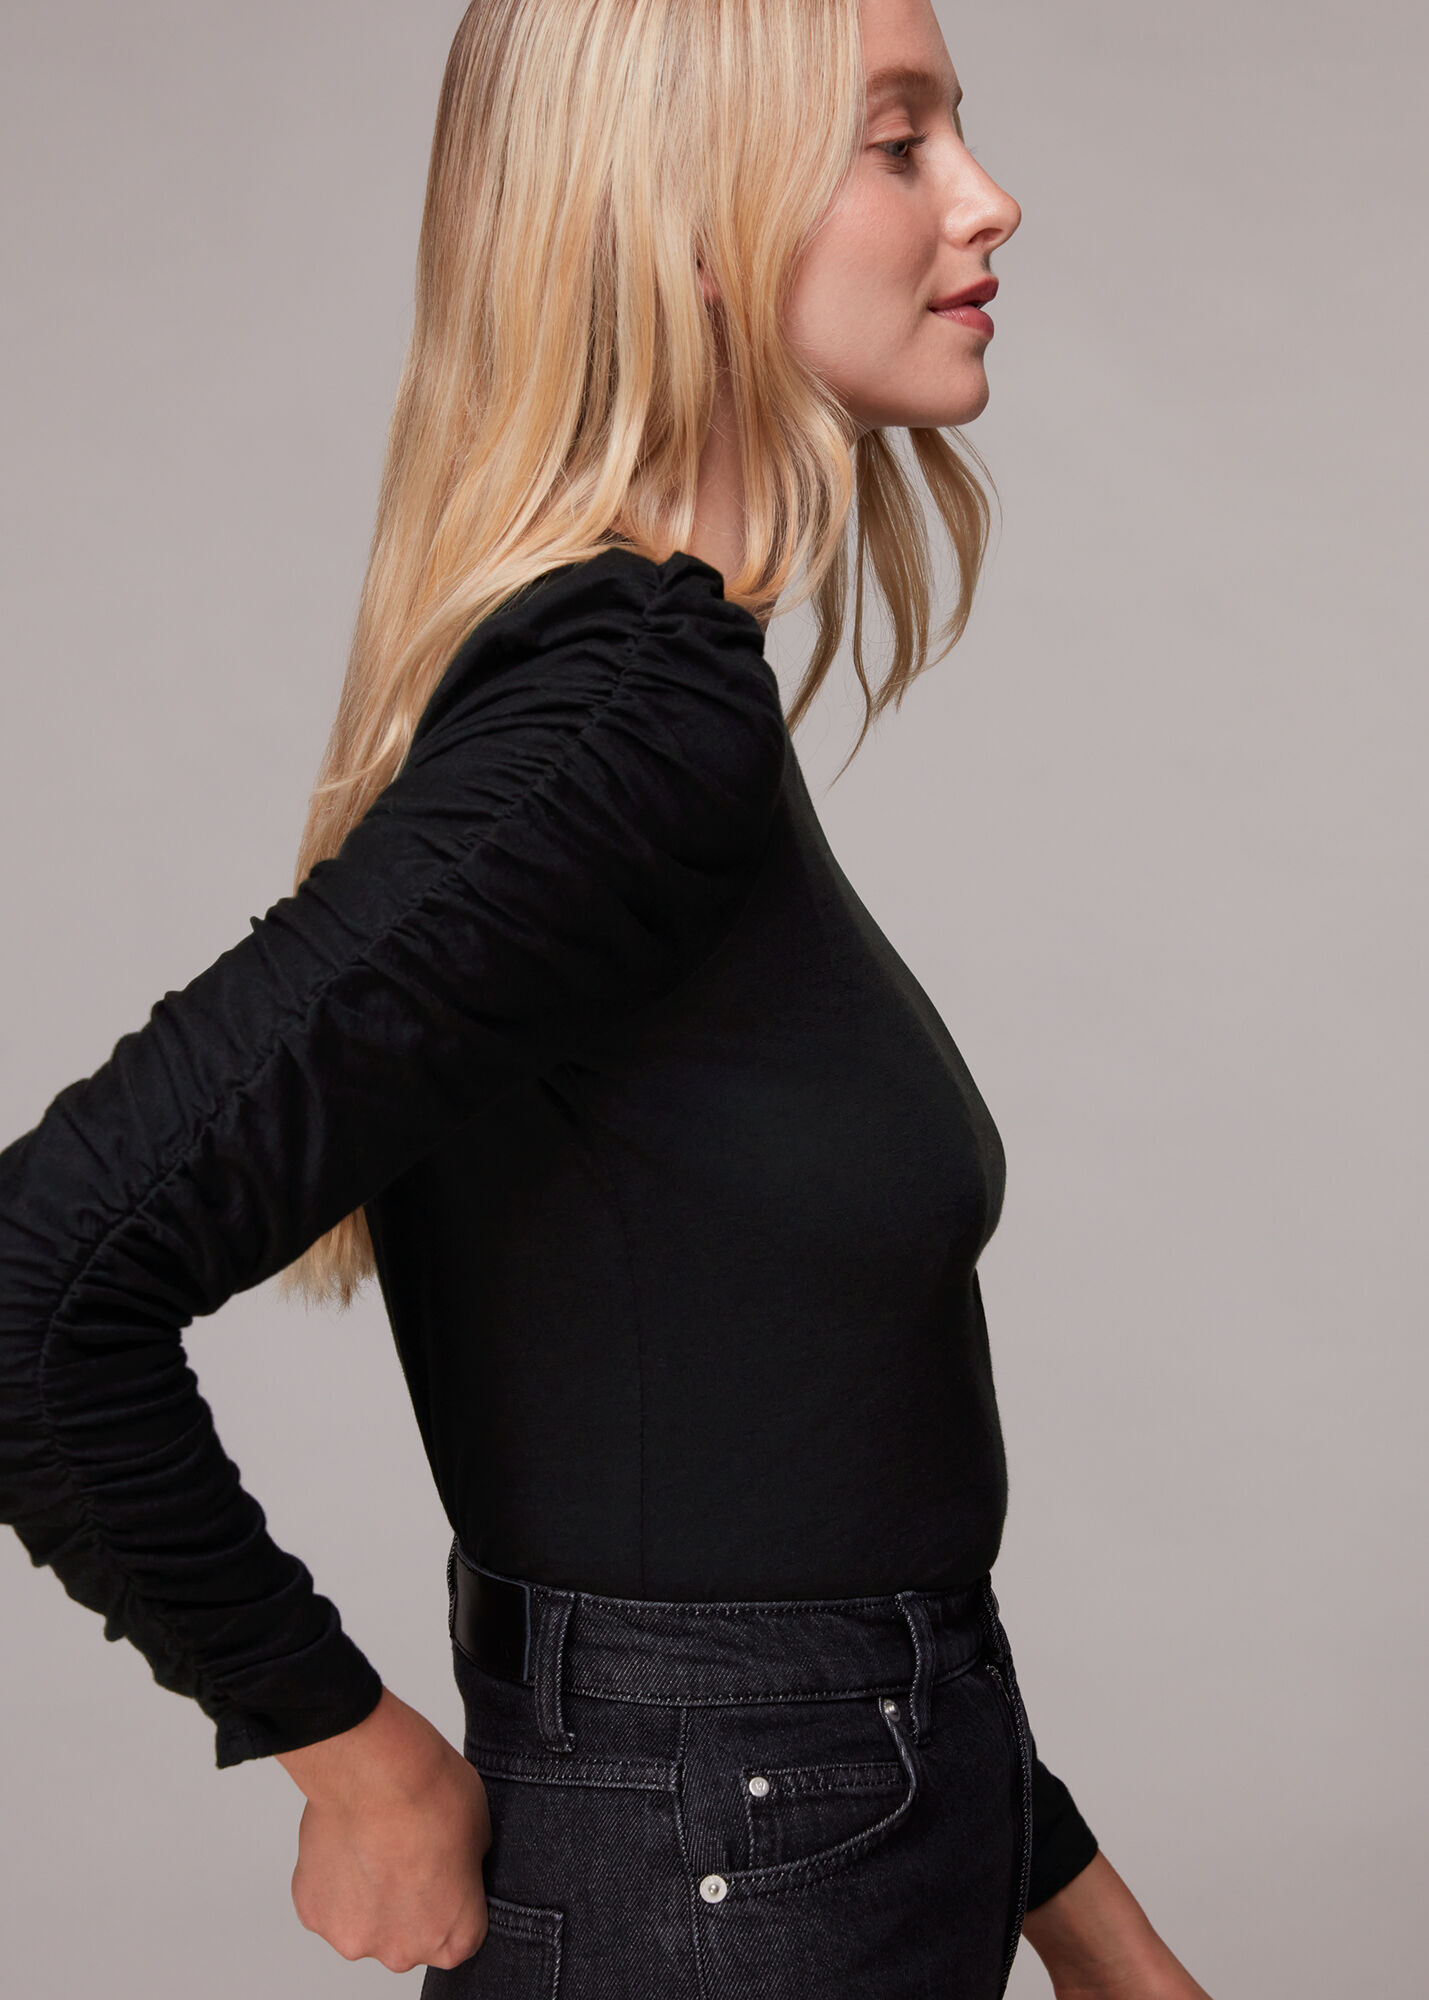 Black Ruched Sleeve Top | WHISTLES